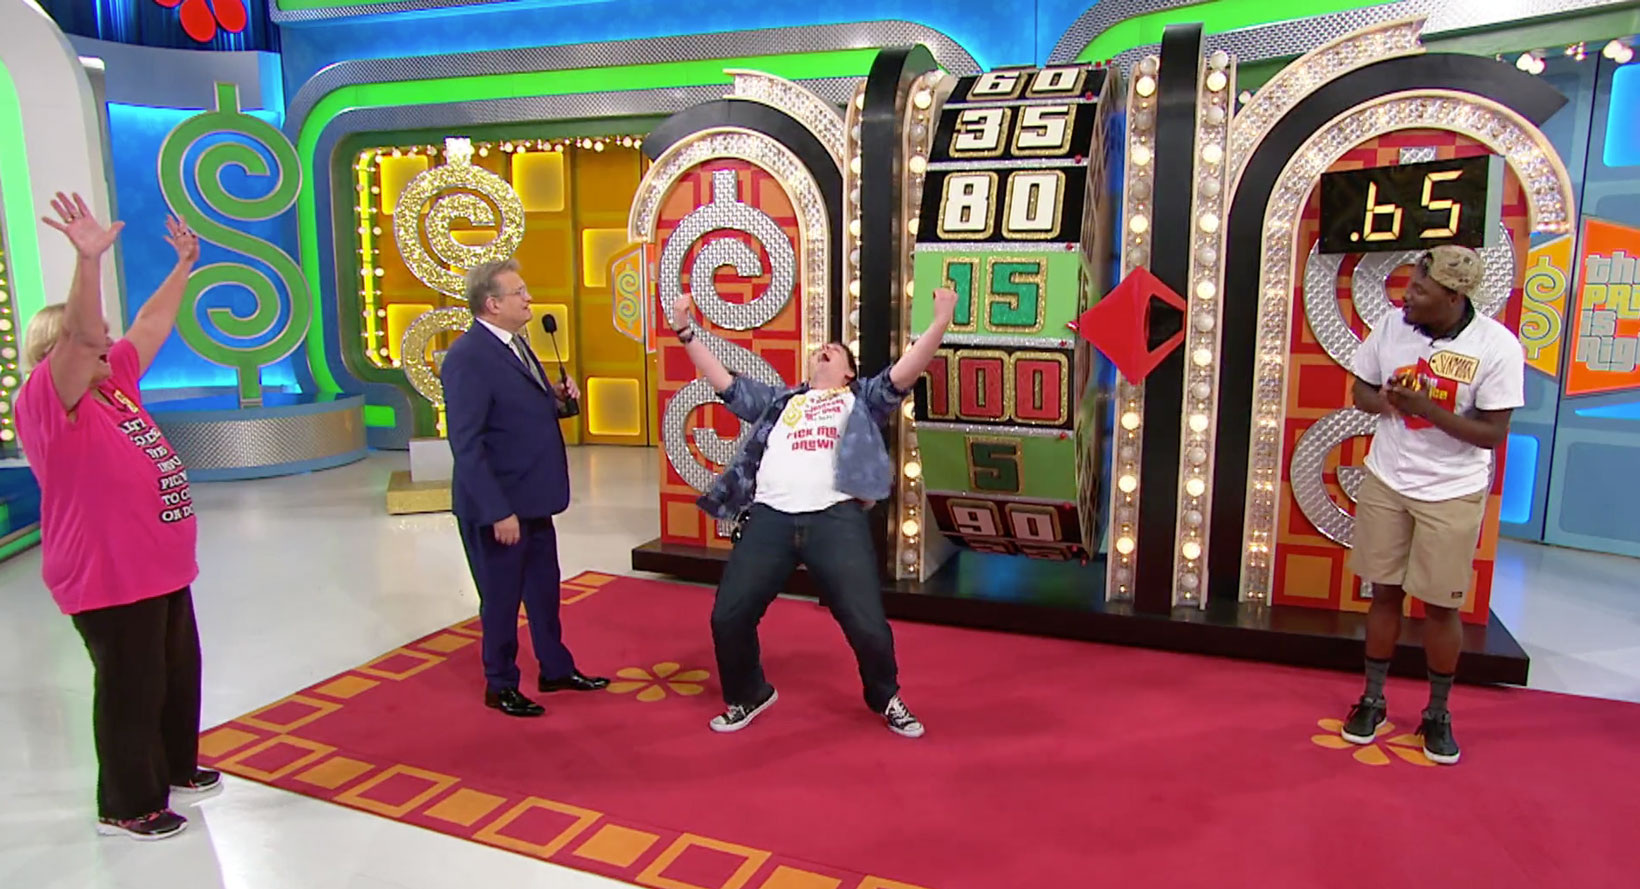 Premature Celebration on The Price is Right | Sean Patrick O'Leary